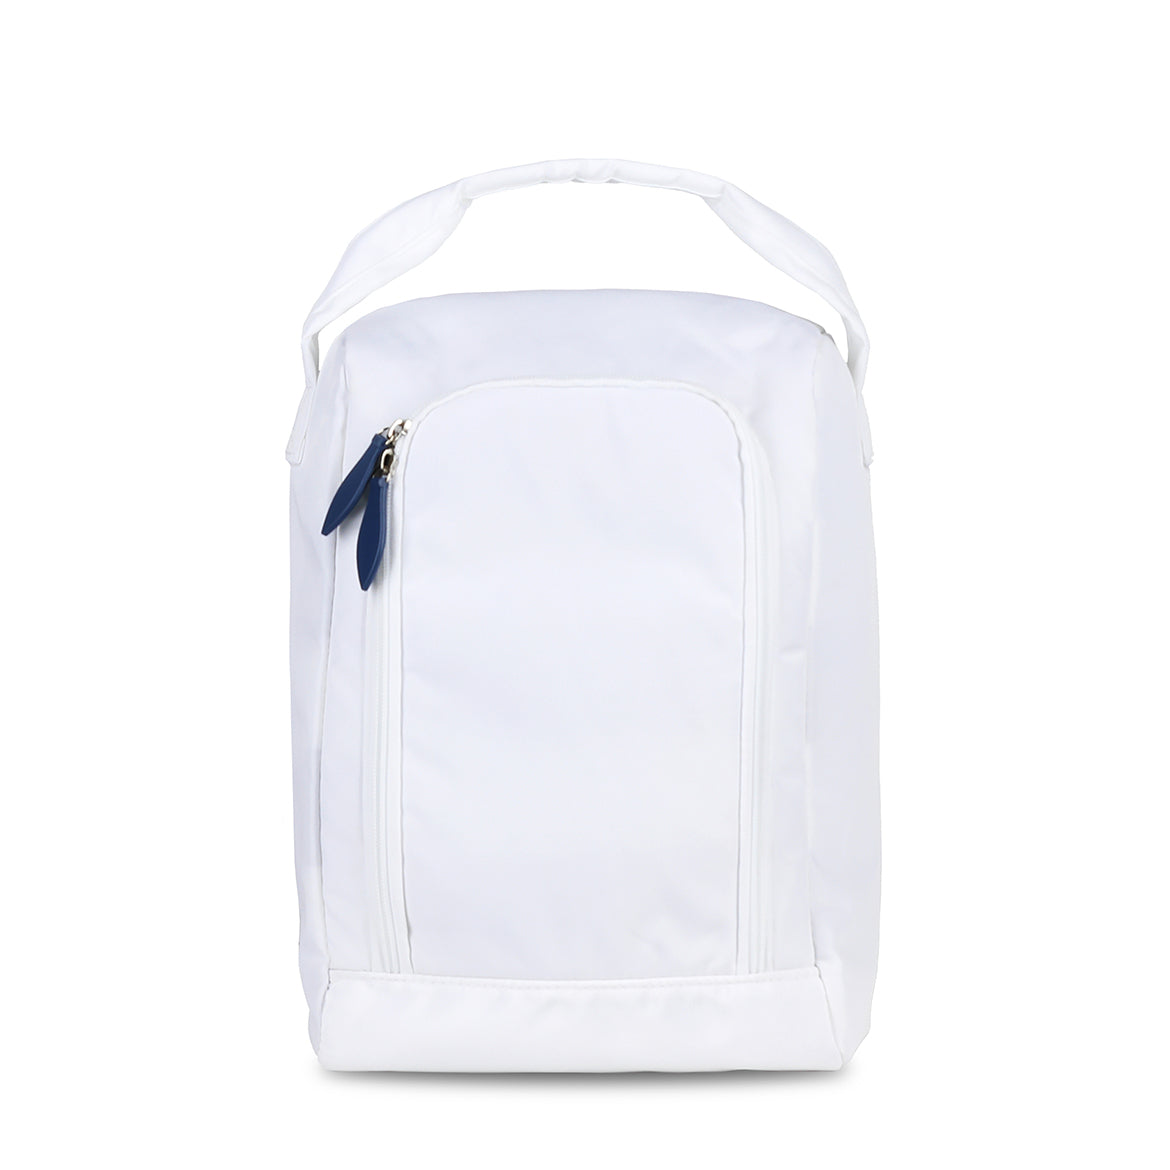 front view of white shoe bag with navy zipper